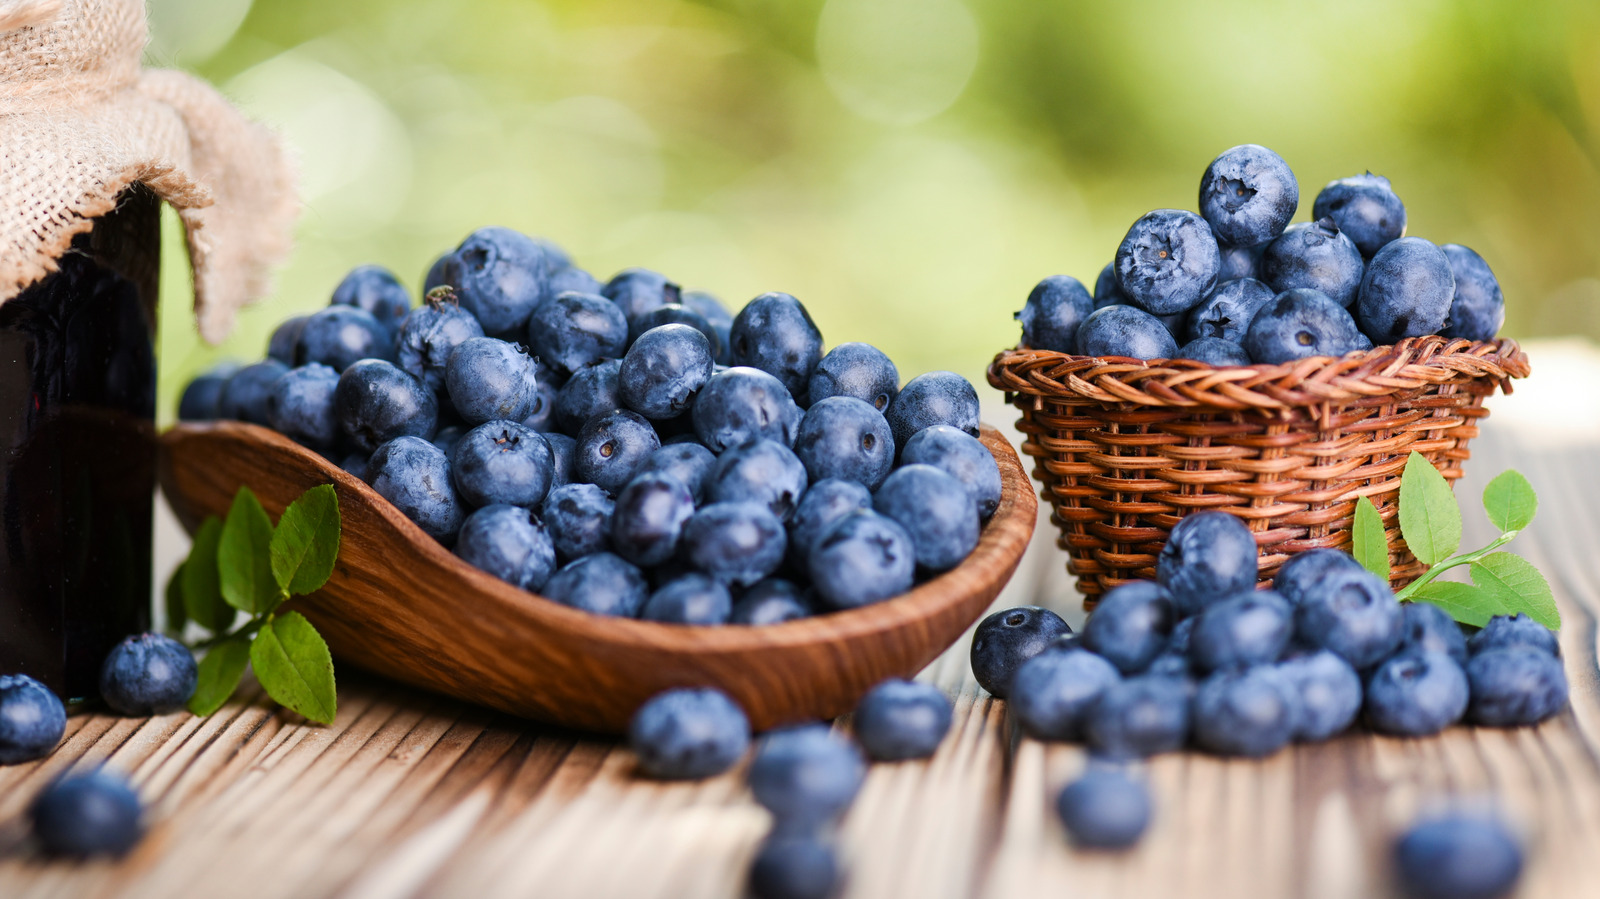 15 Types Of Blueberries And What Makes Them Unique